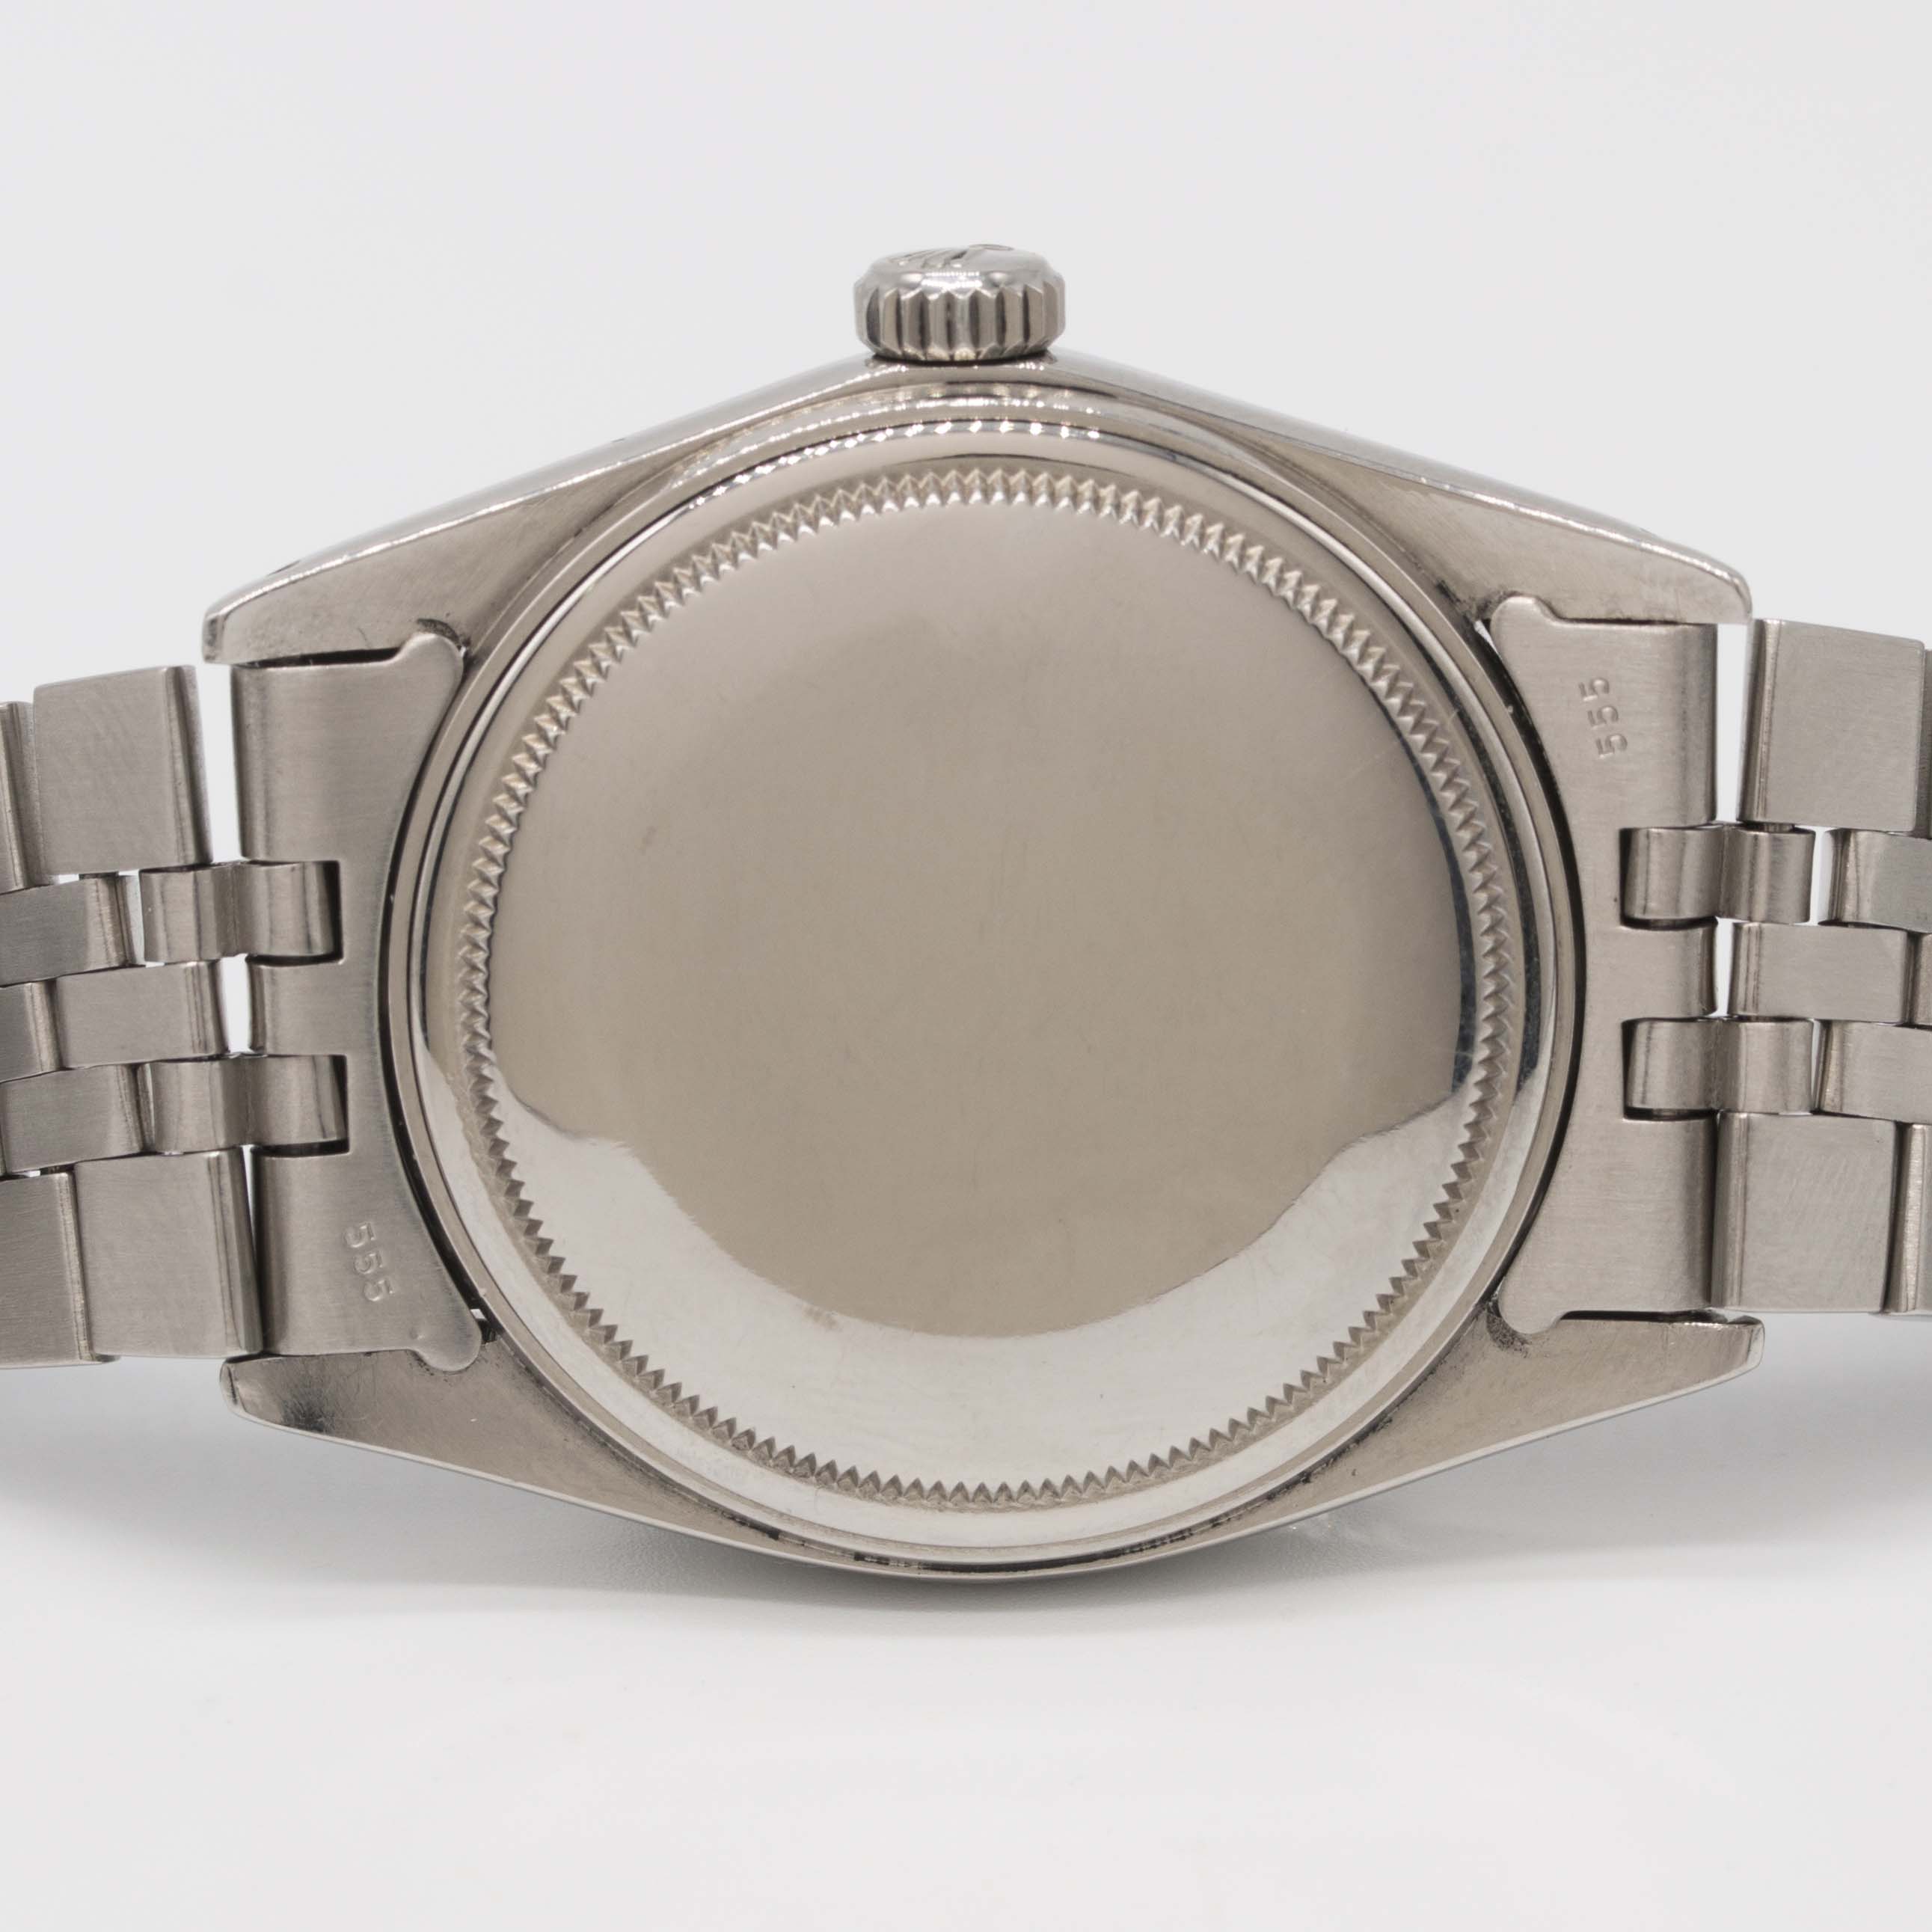 A GENTLEMAN'S STEEL & WHITE GOLD ROLEX OYSTER PERPETUAL DATEJUST BRACELET WATCH CIRCA 1984, REF. - Image 7 of 11